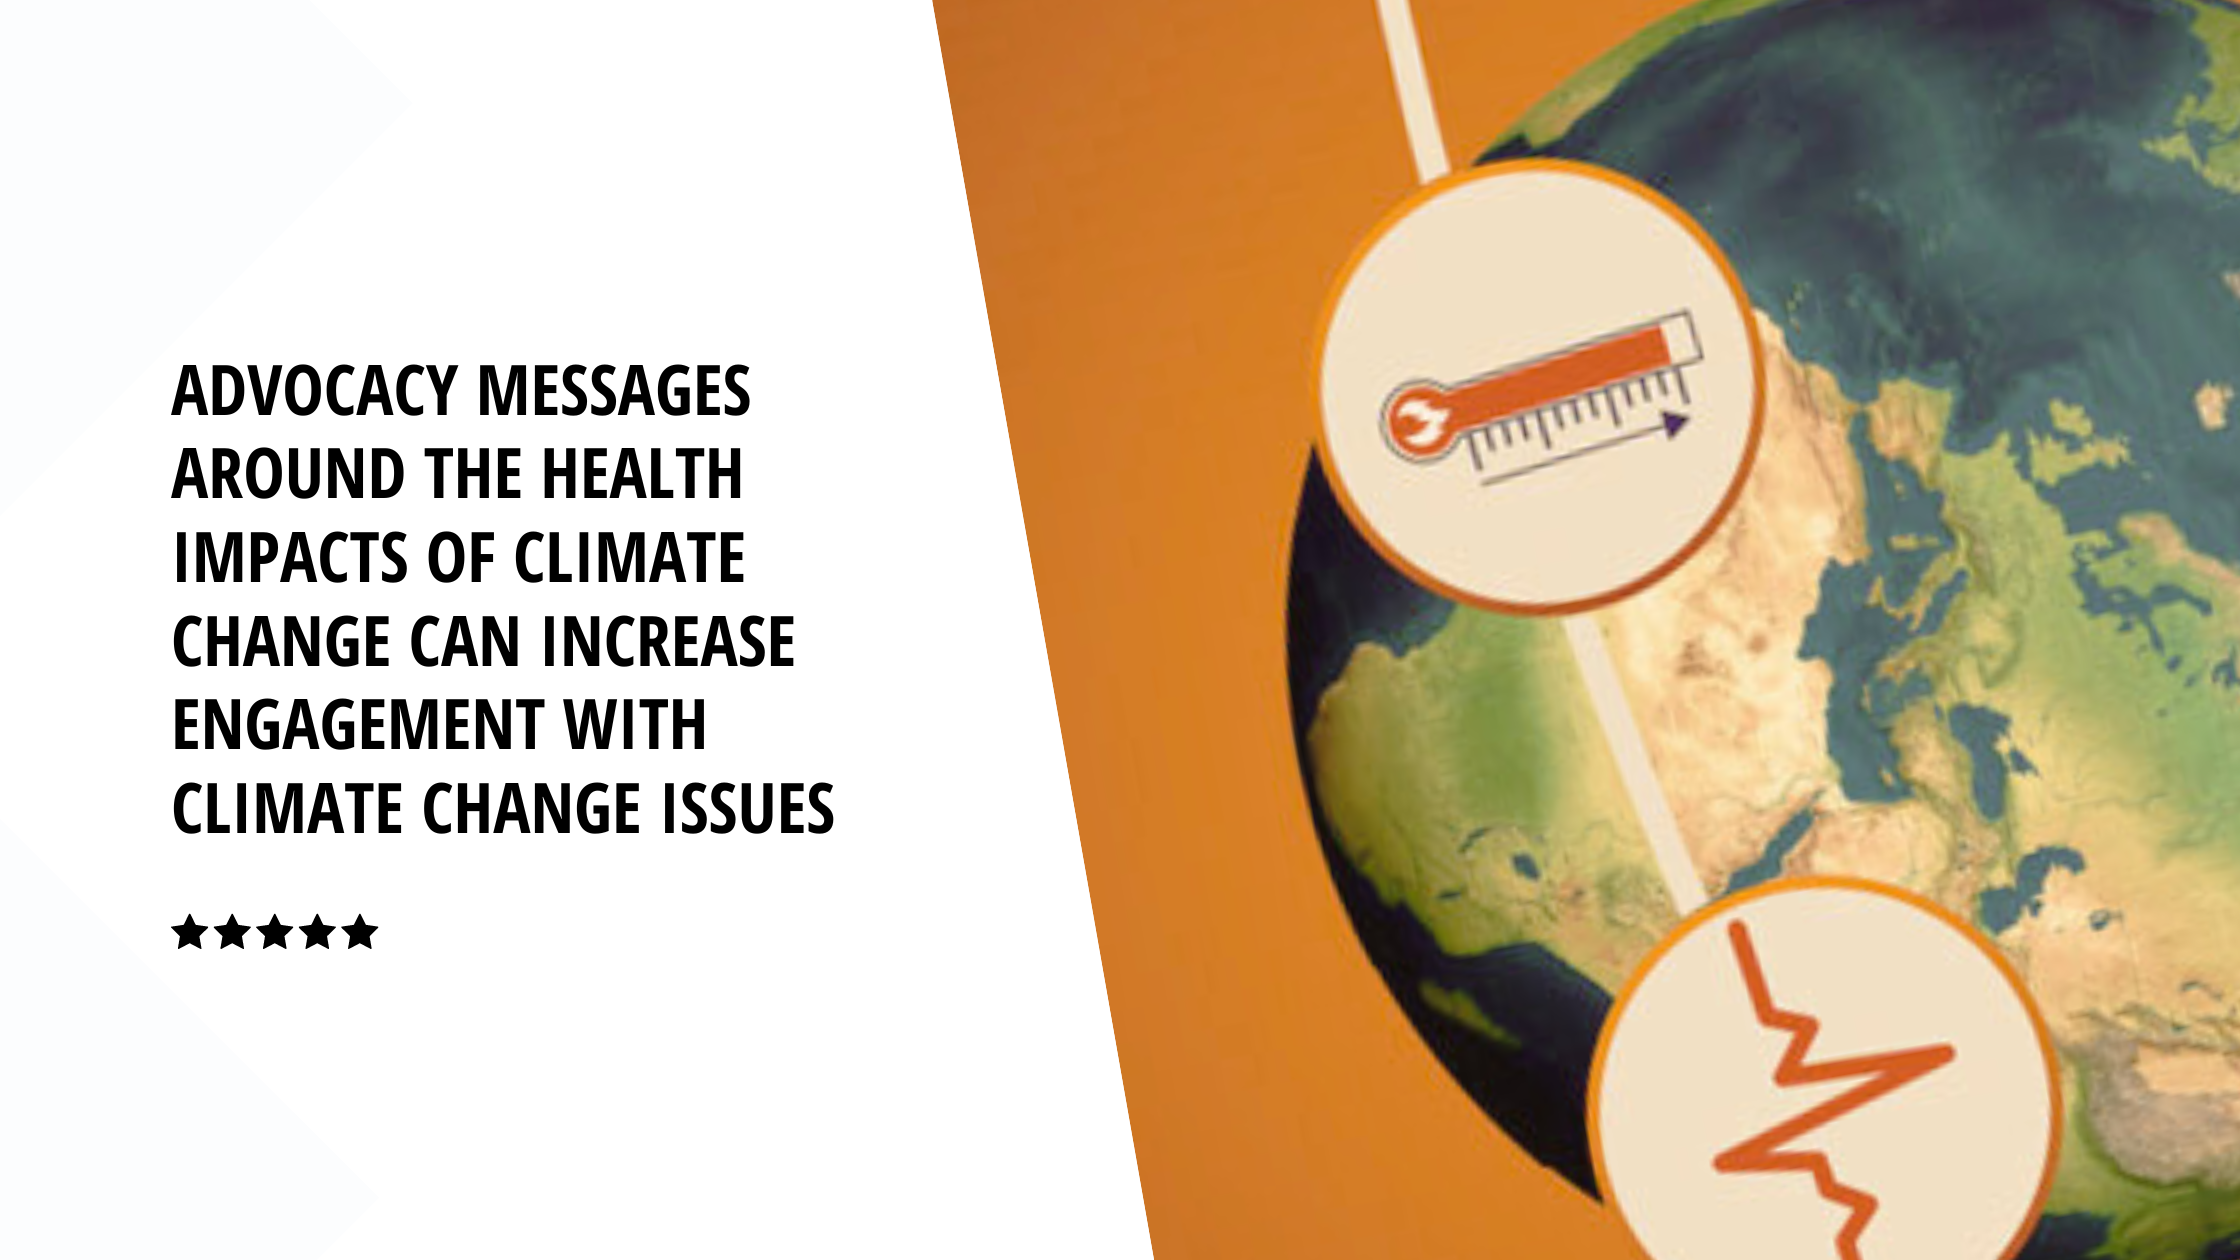 How to Frame Advocacy Messages About Climate Change: Providing Evidence on Its Health Consequences